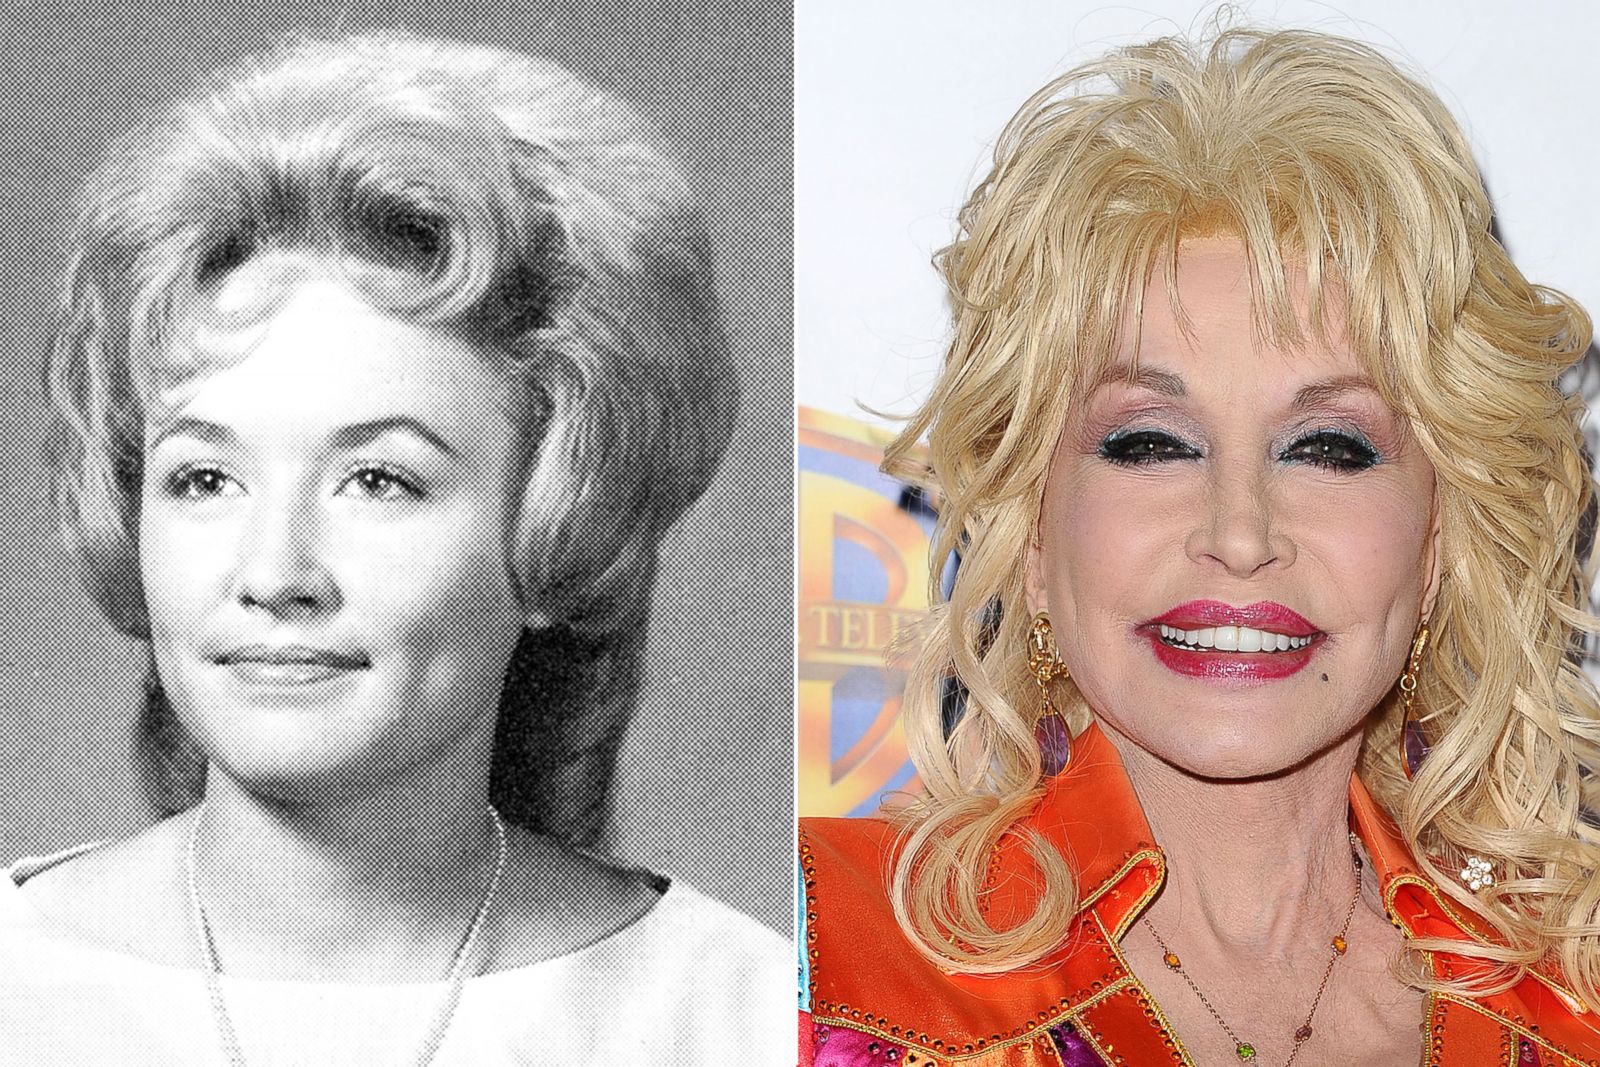 Dolly Parton Picture | Before they were famous - ABC News1600 x 1067